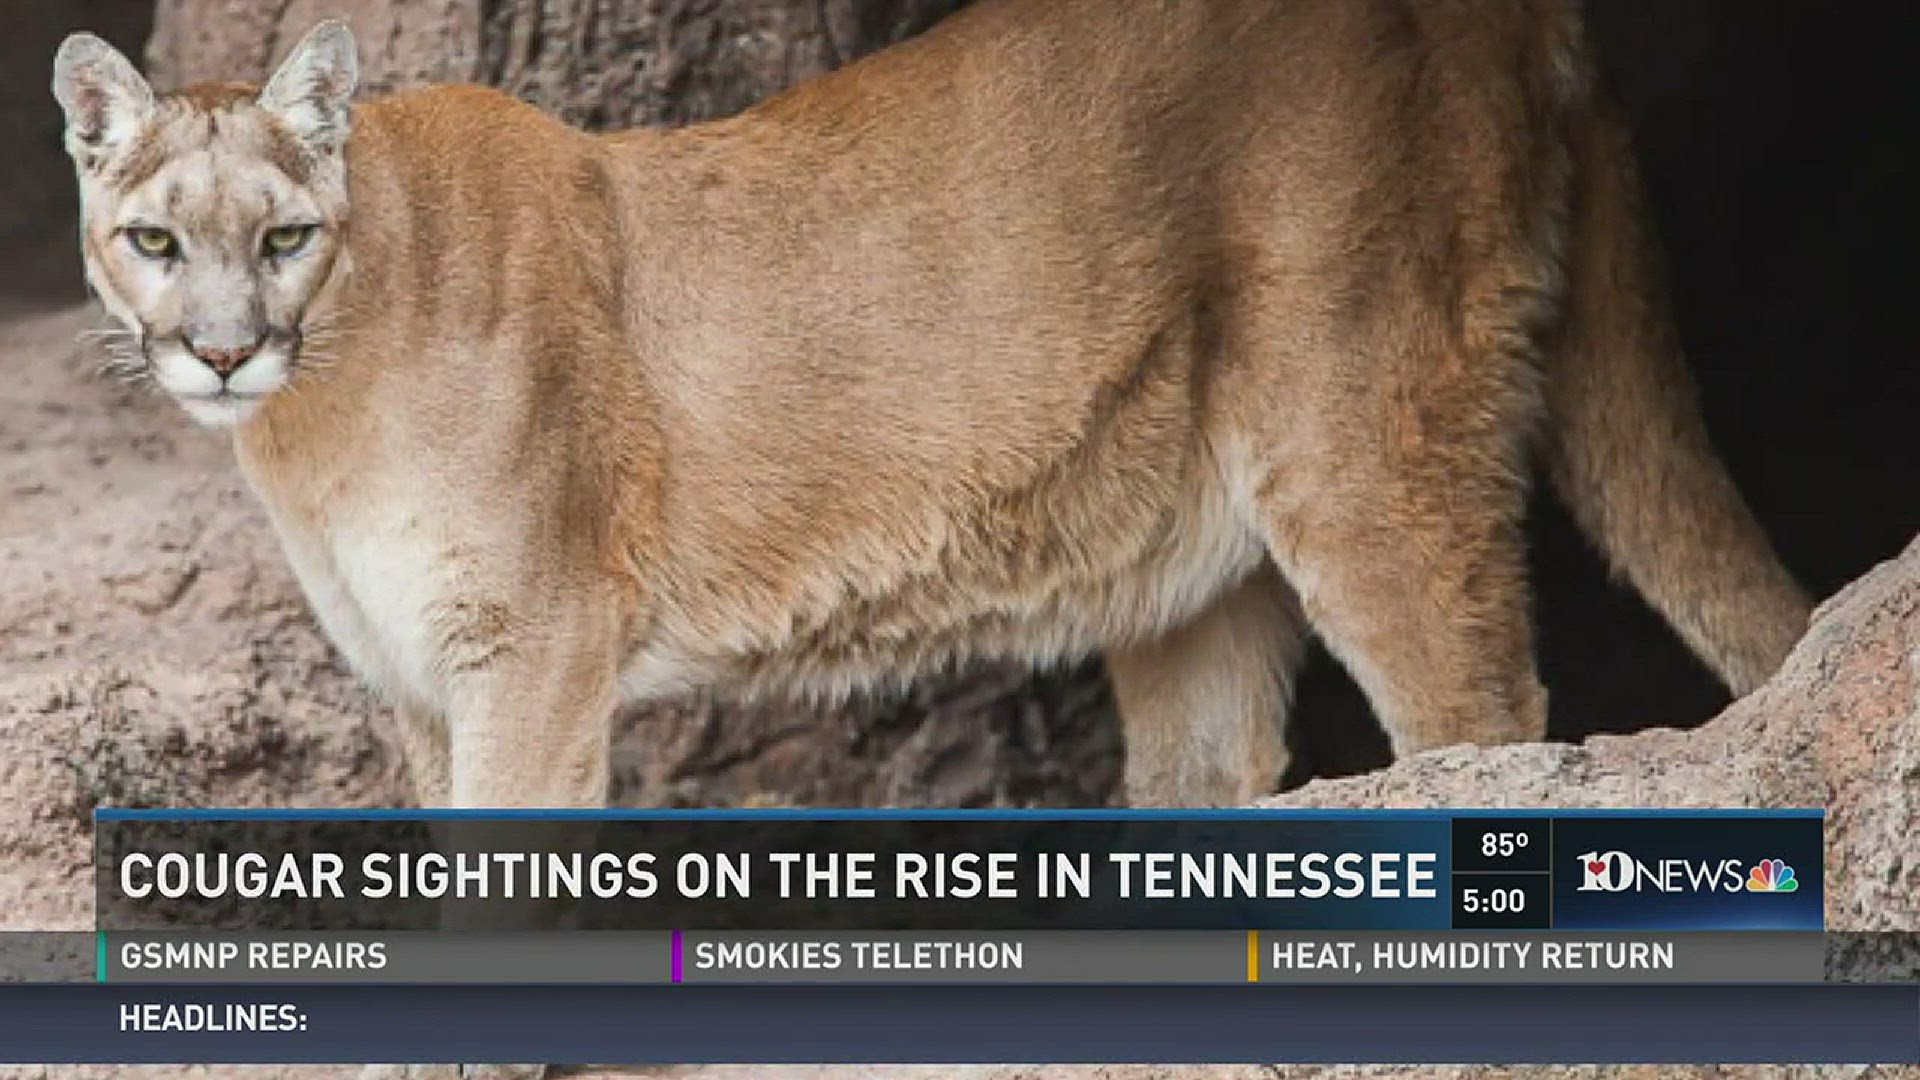 There are several confirmed cougar sightings of cougars in west and middle Tennessee, but TWRA officials don't expect them to migrate to East Tennessee.